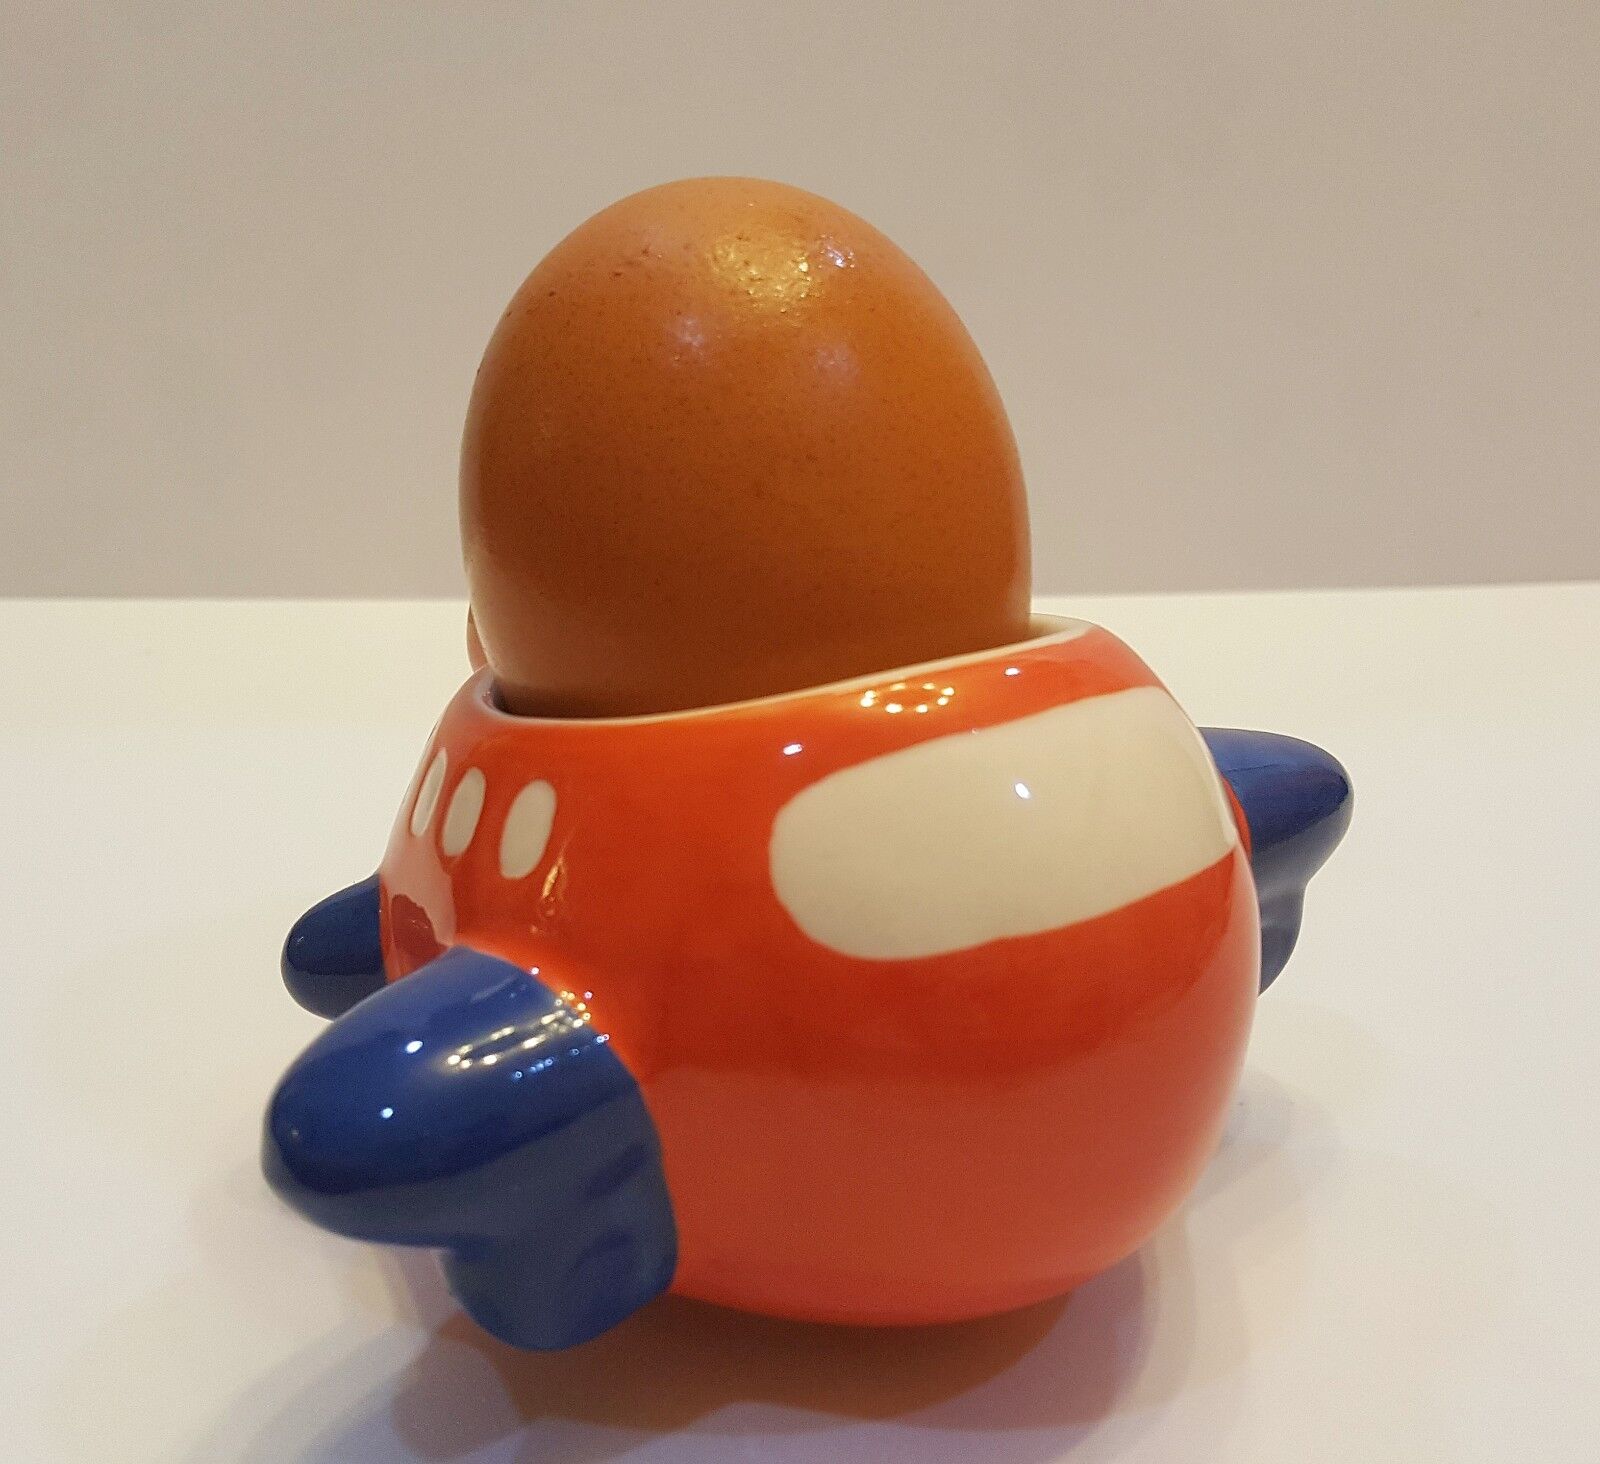 Orange Air Plane Egg Cup Figurine Lovely Thai Ceramic Kitchenware Collect Home